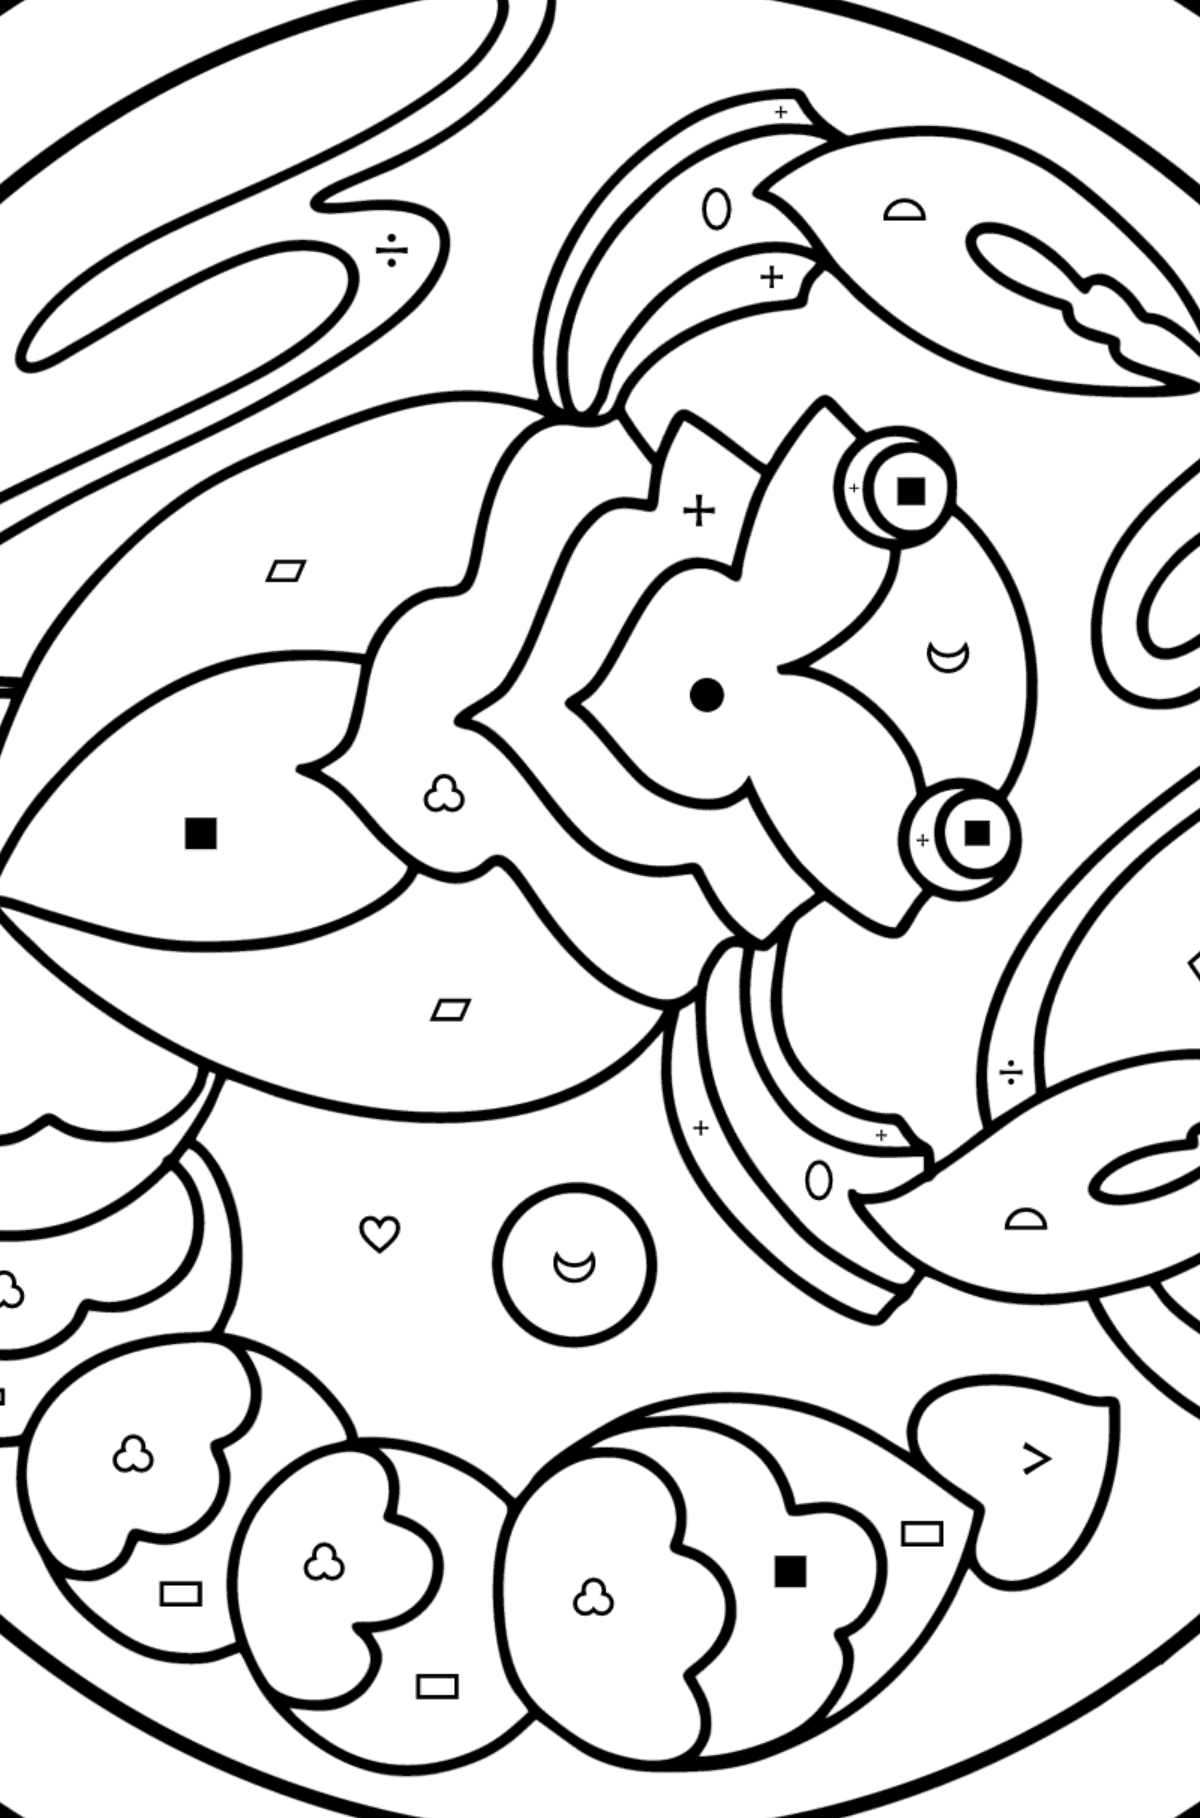 Coloring page for kids - zodiac sign Scorpio - Coloring by Symbols and Geometric Shapes for Kids